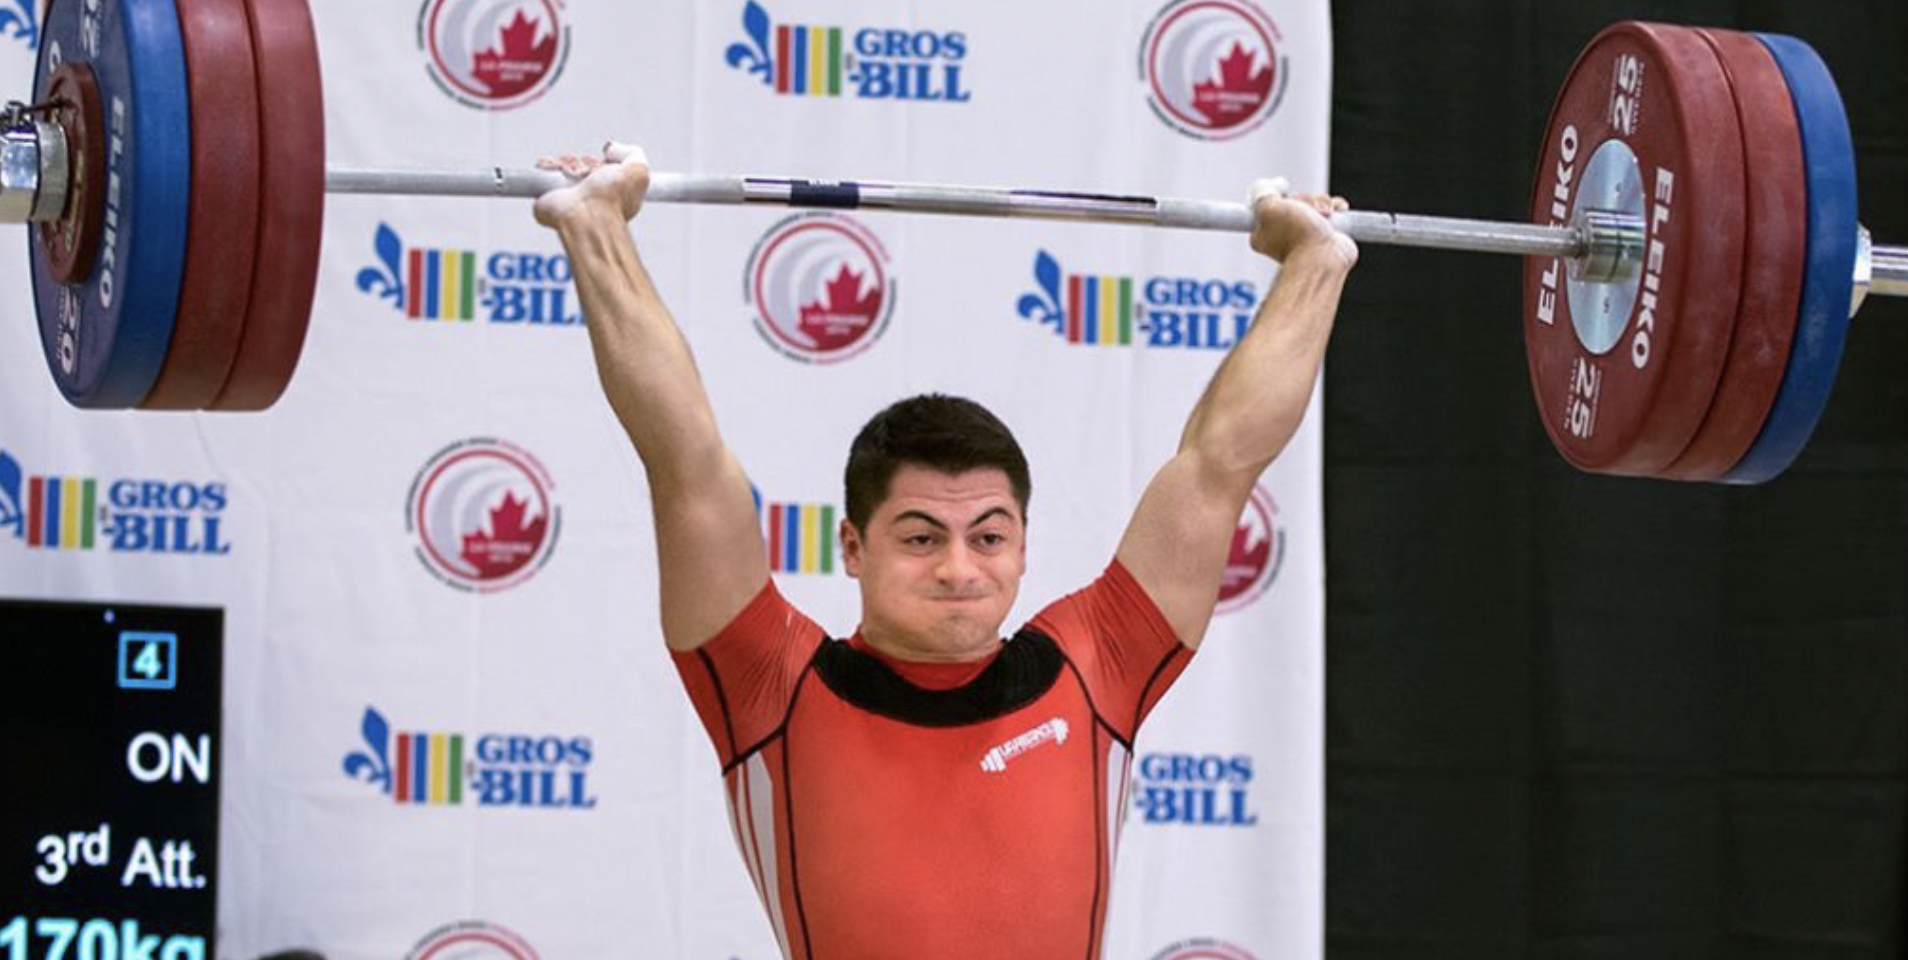 Weightlifter Varbanov to compete again next year - but will it be for Canada?